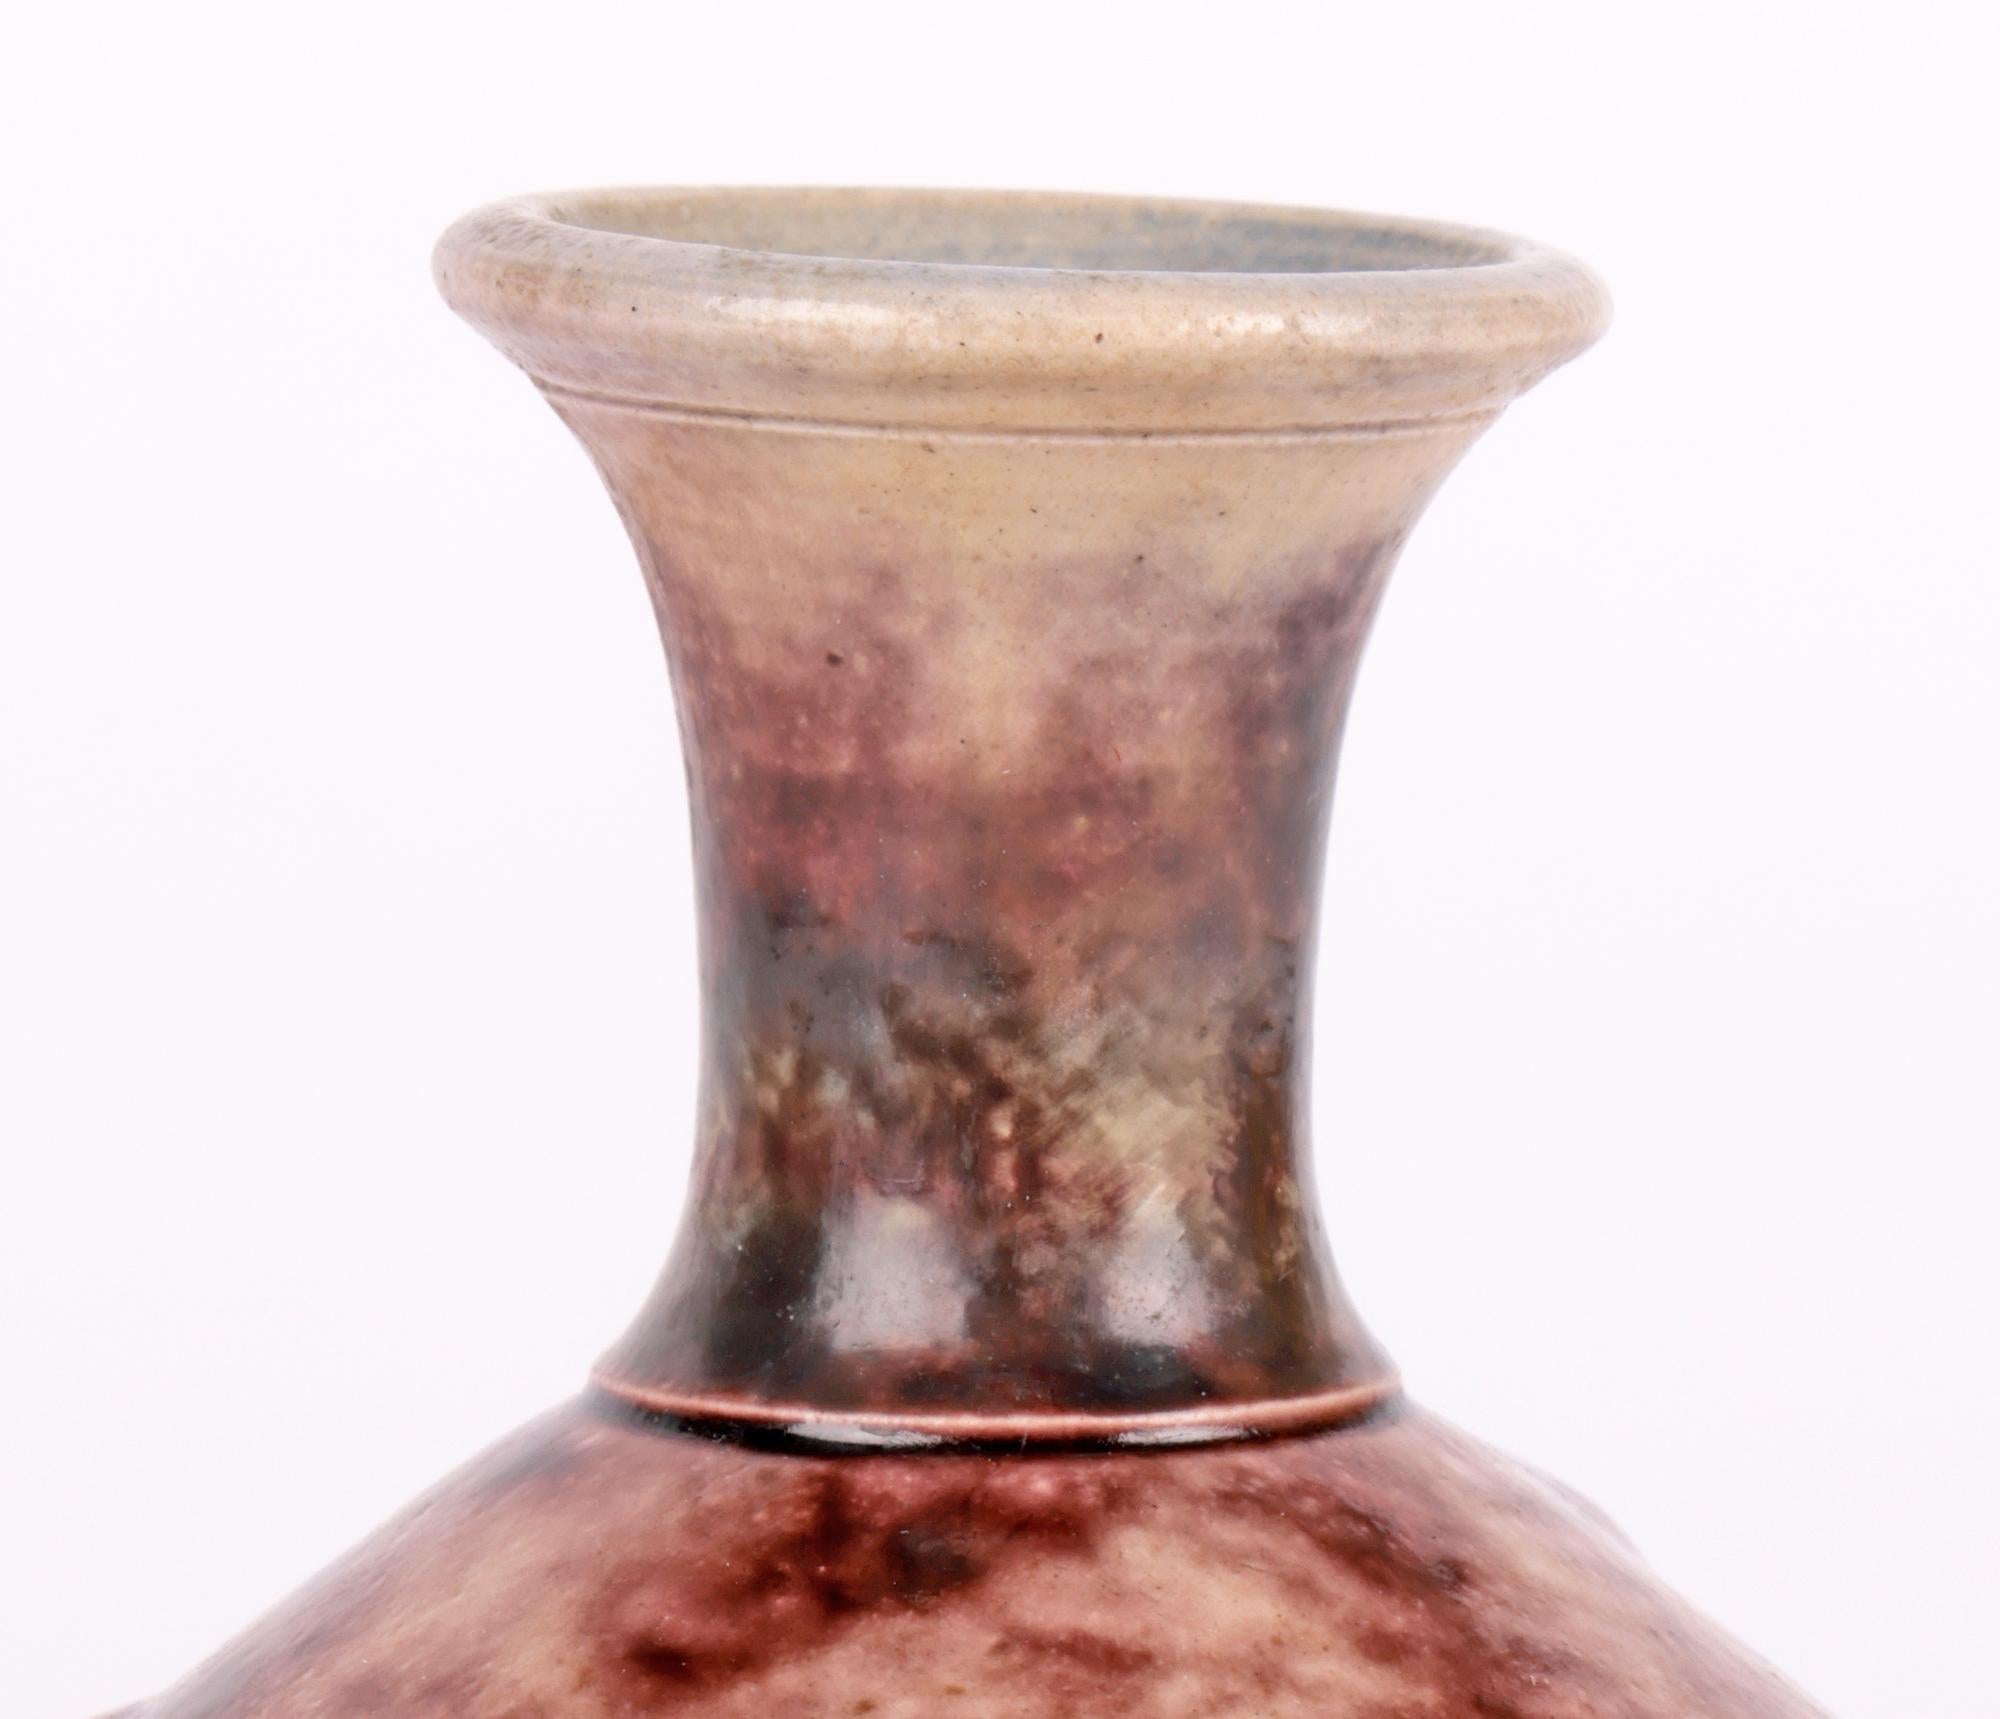 A stylish Martin Brothers stoneware vase of ovoid bottle shape with narrow waisted cylindrical neck and probably quite an early example dating from the 19th century. The vase stands on a narrow round base with round bulbous shaped body and with a